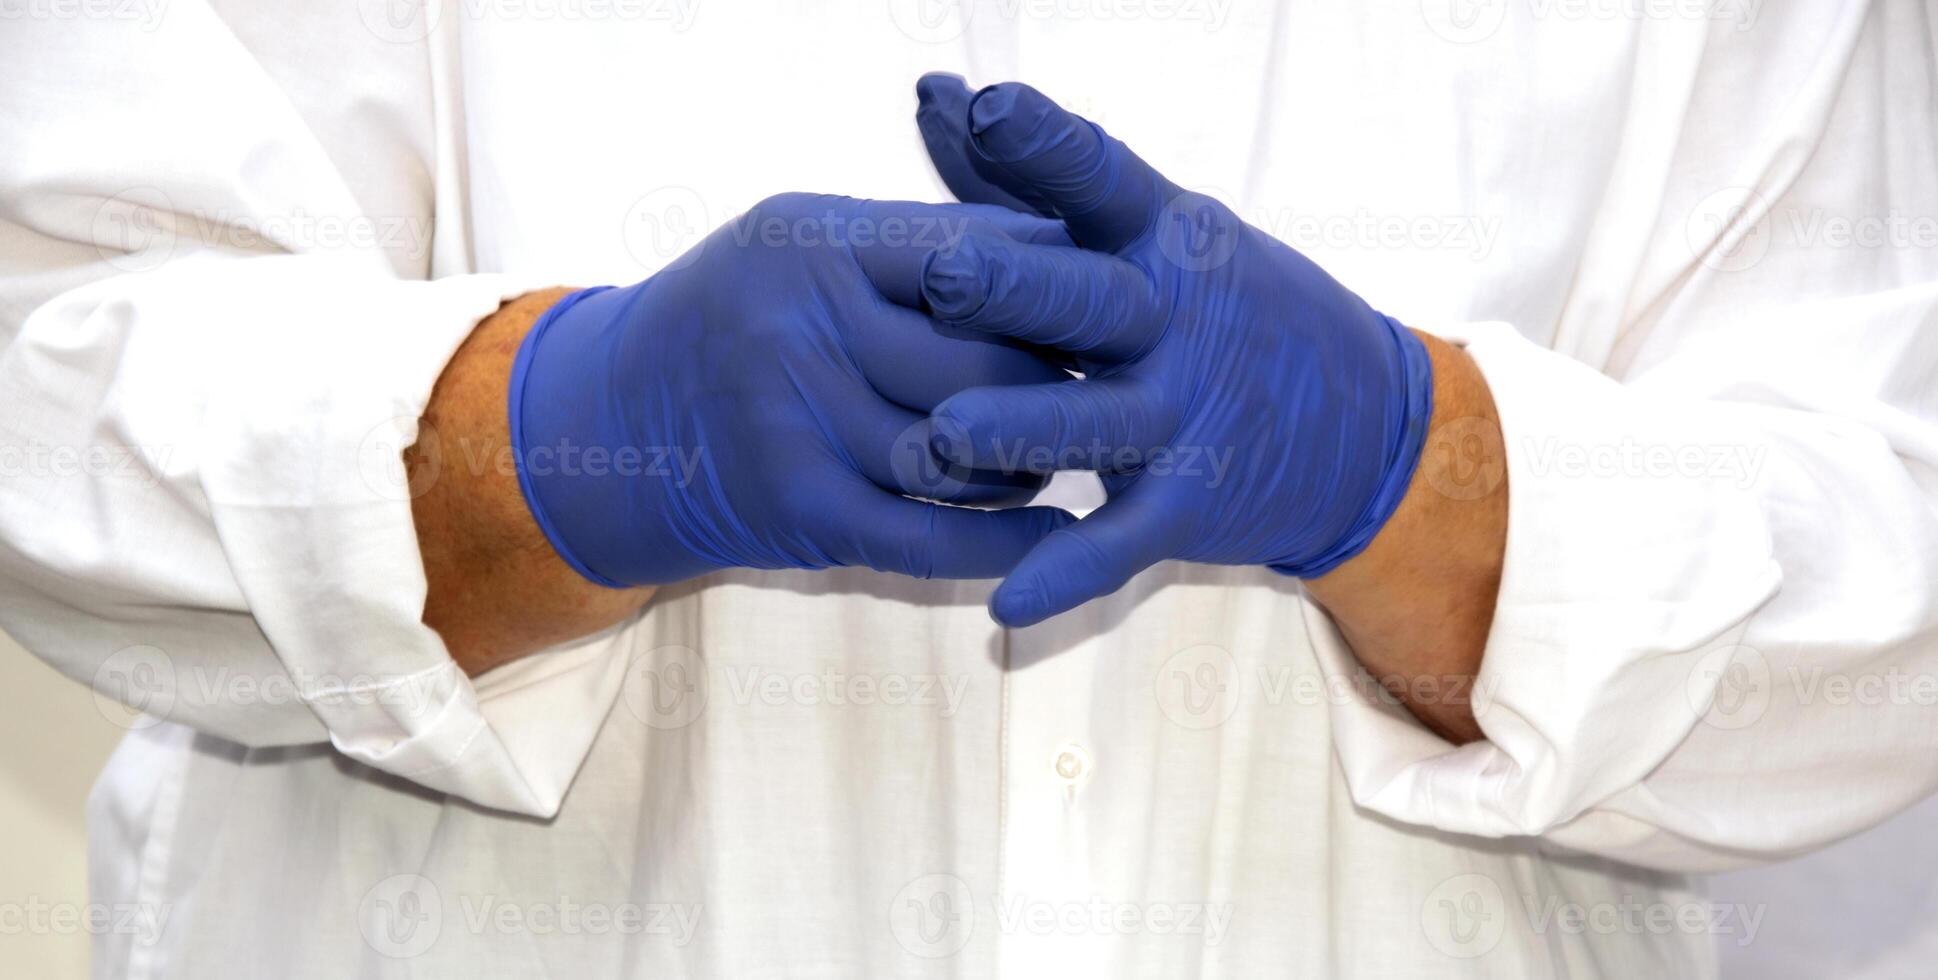 Medic hands in blue nitrile gloves. The doctor puts on sterile gloves against the background of a medical gown. photo